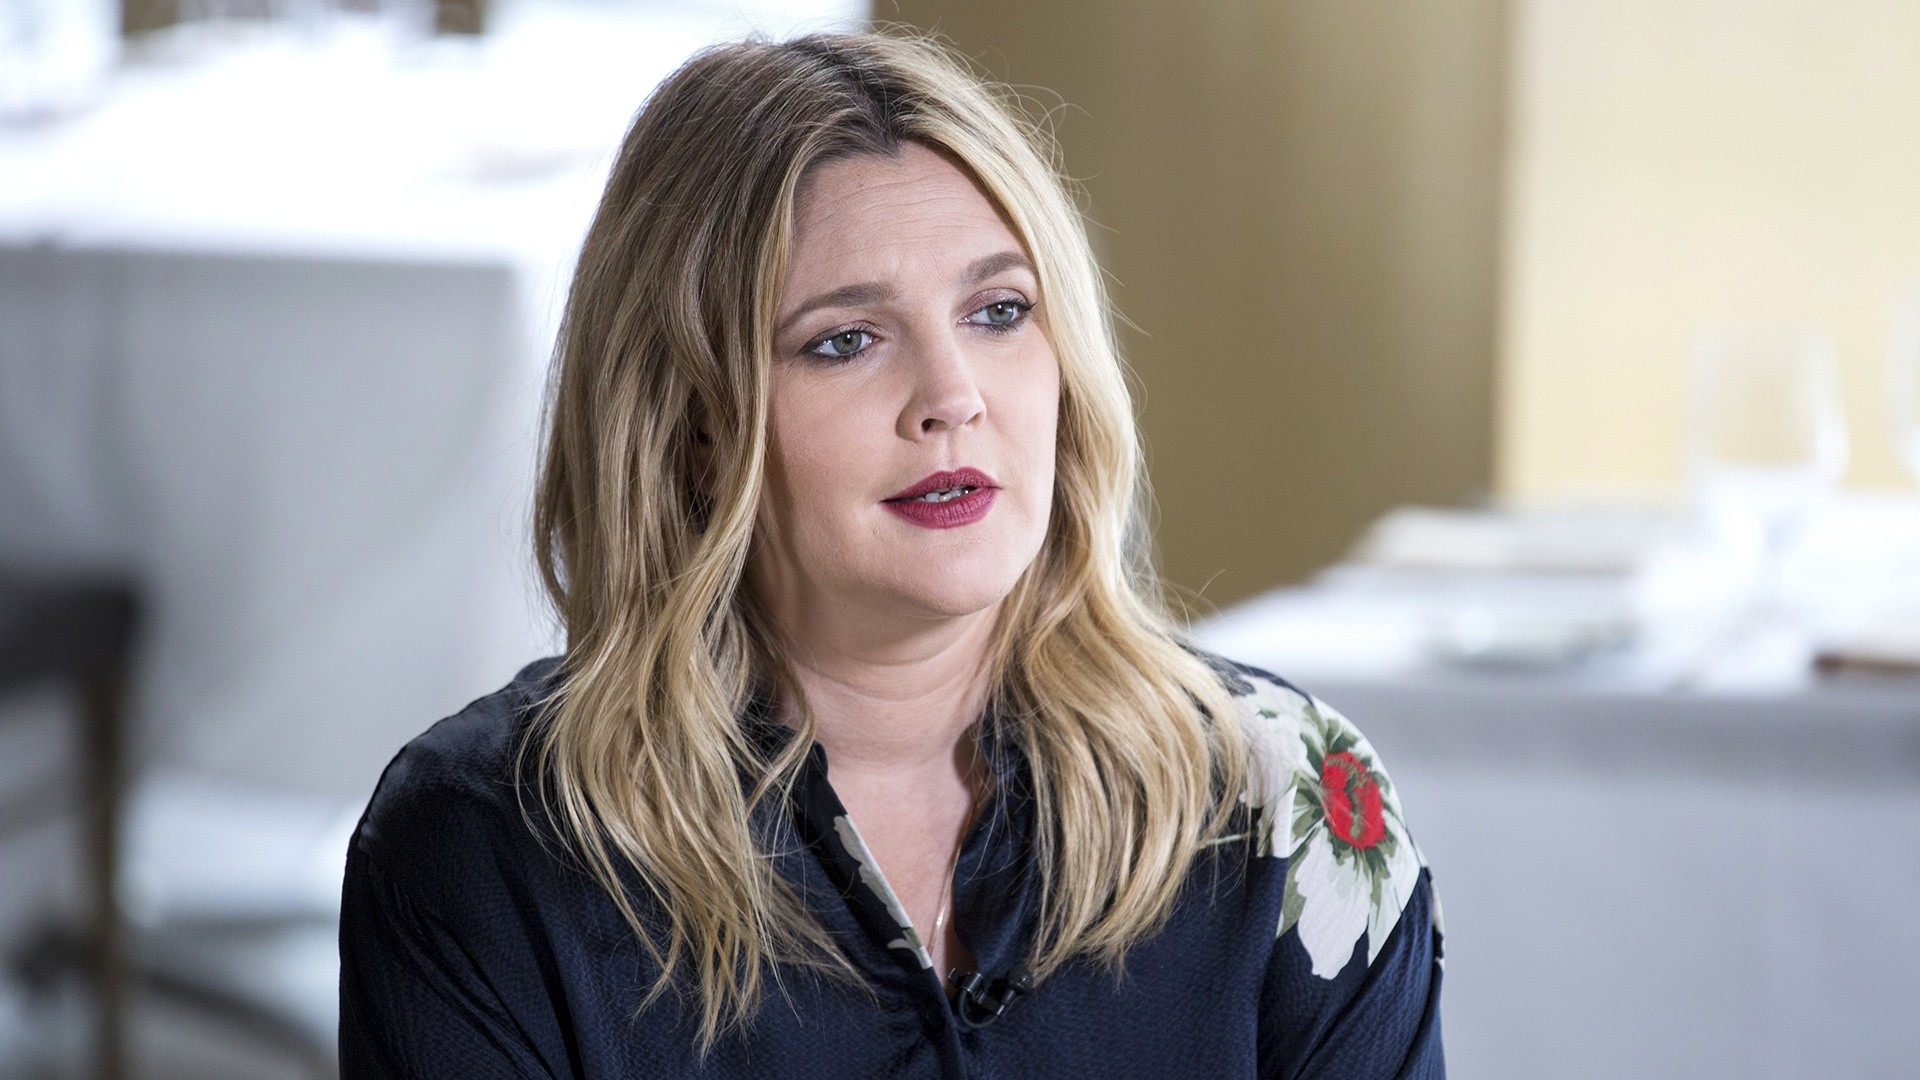 Drew Barrymore writes about (lack of) sex life since her 2016 split